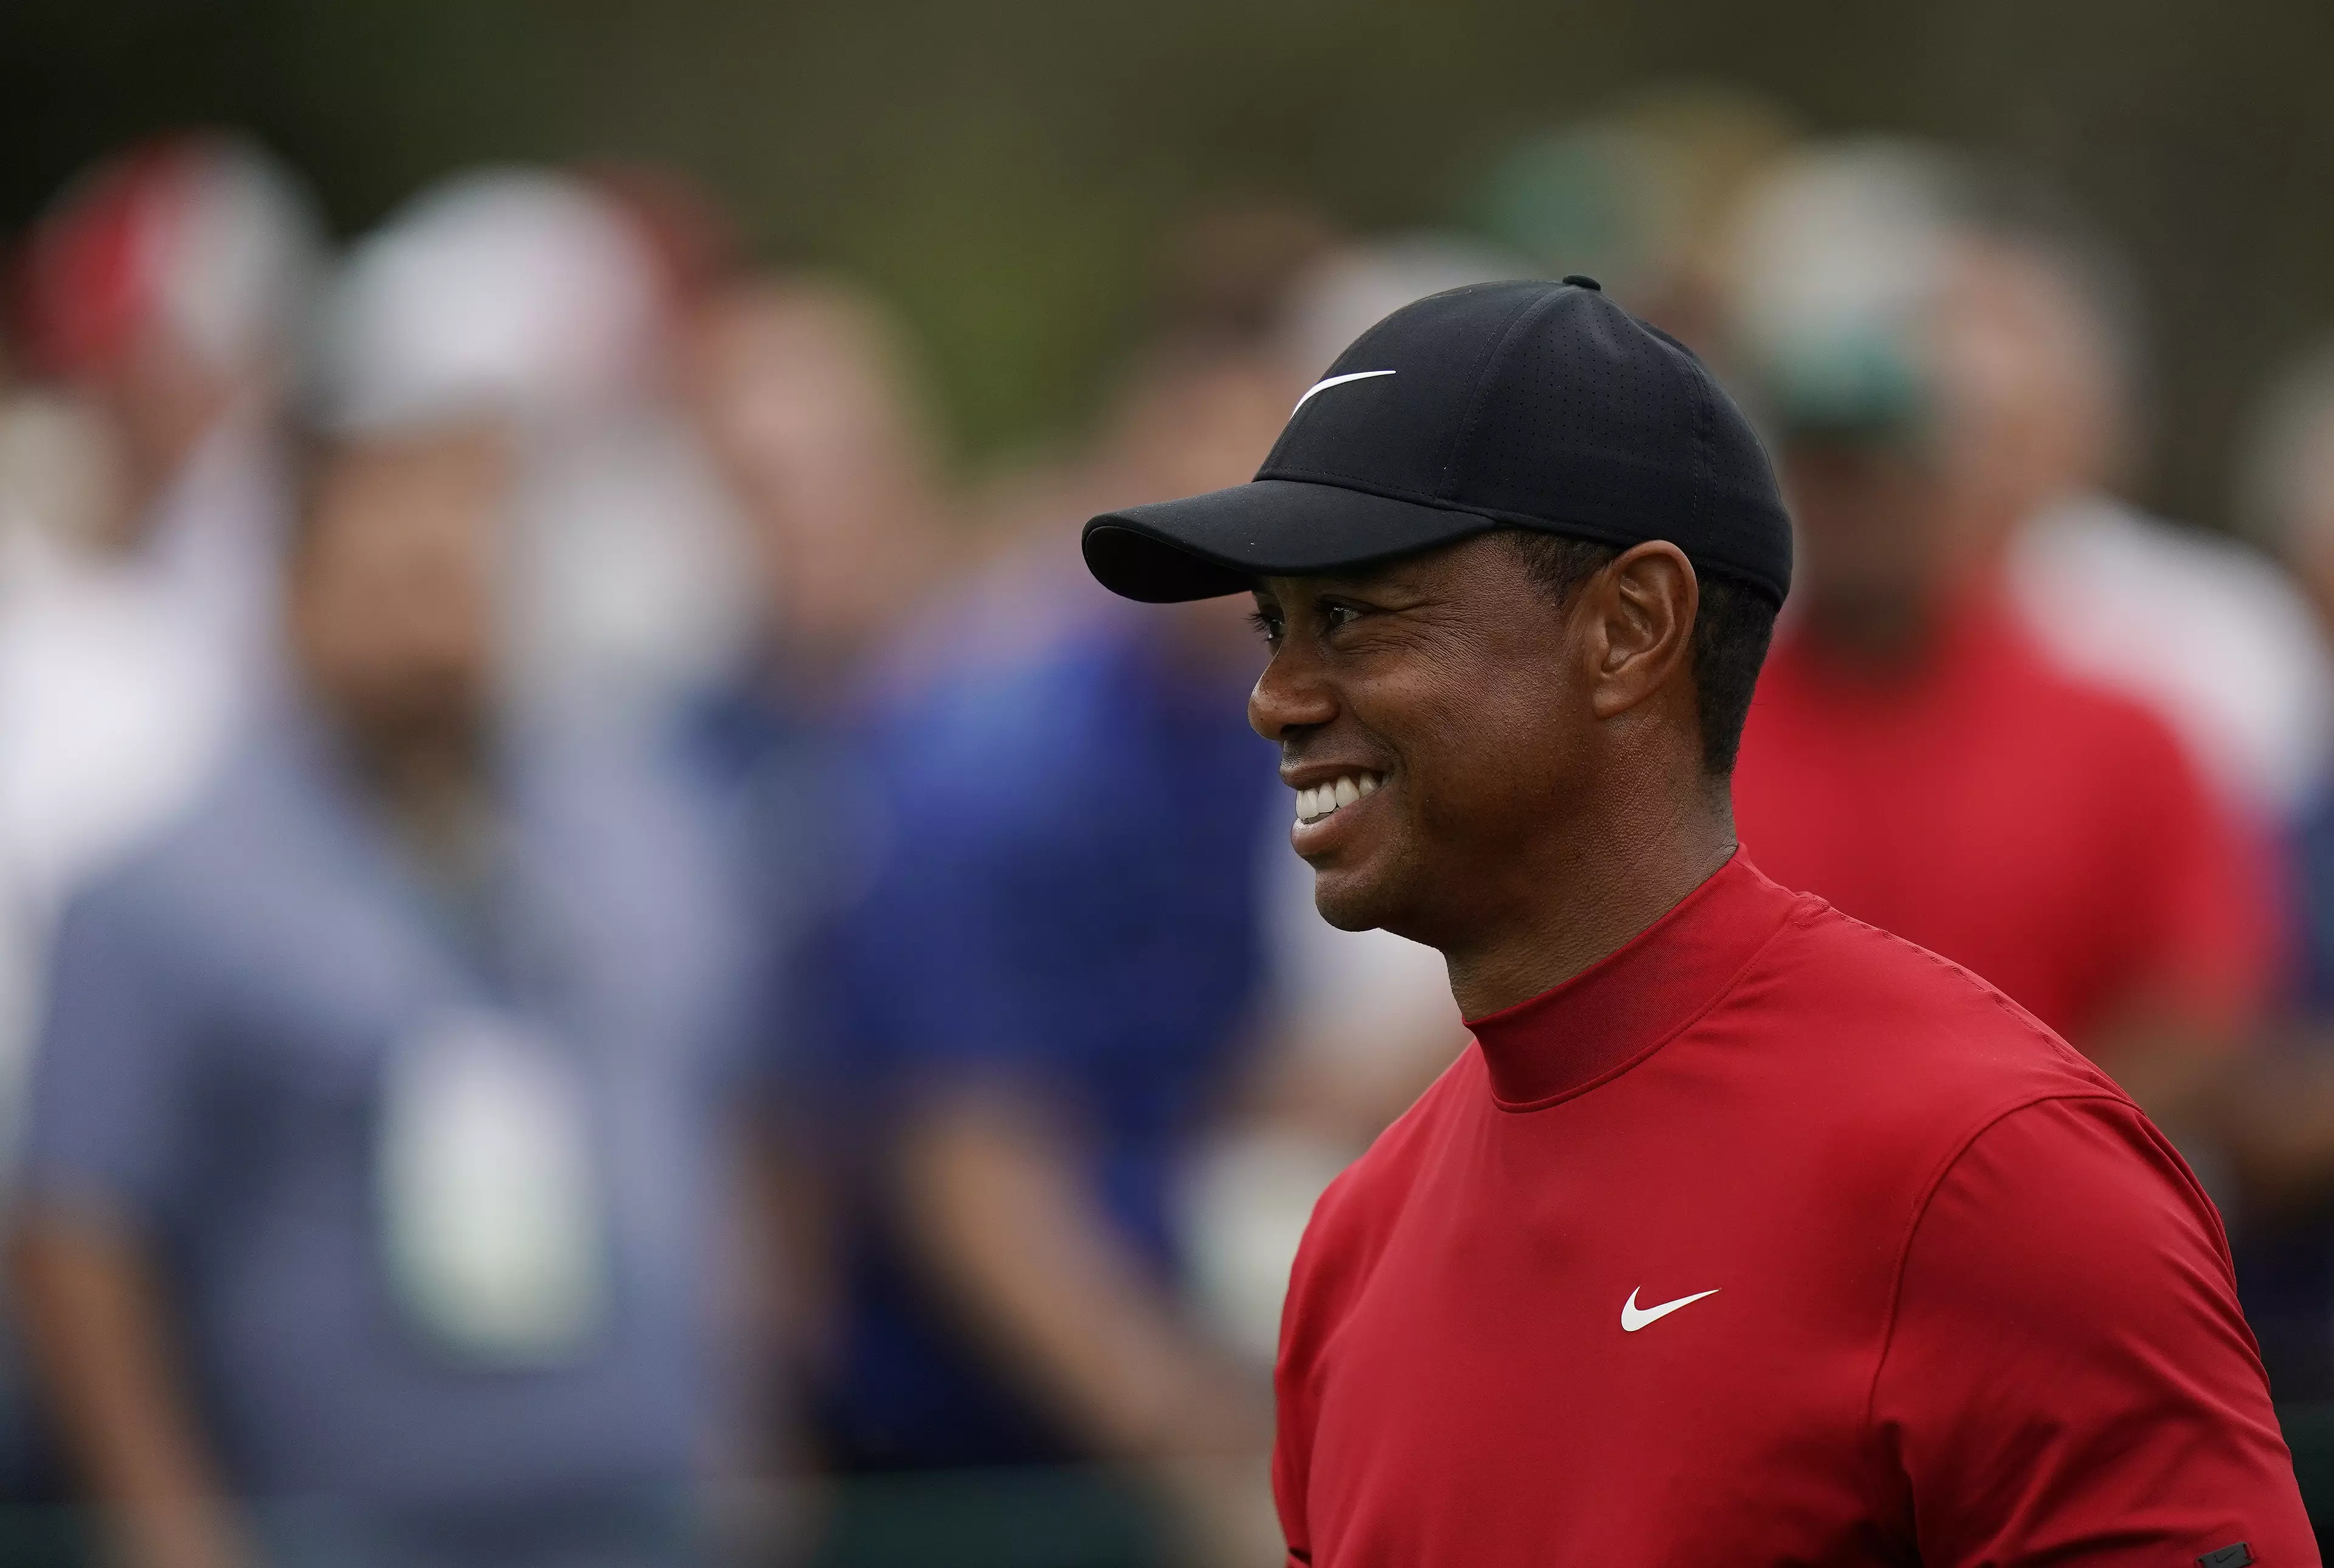 Tiger won the Masters this year.